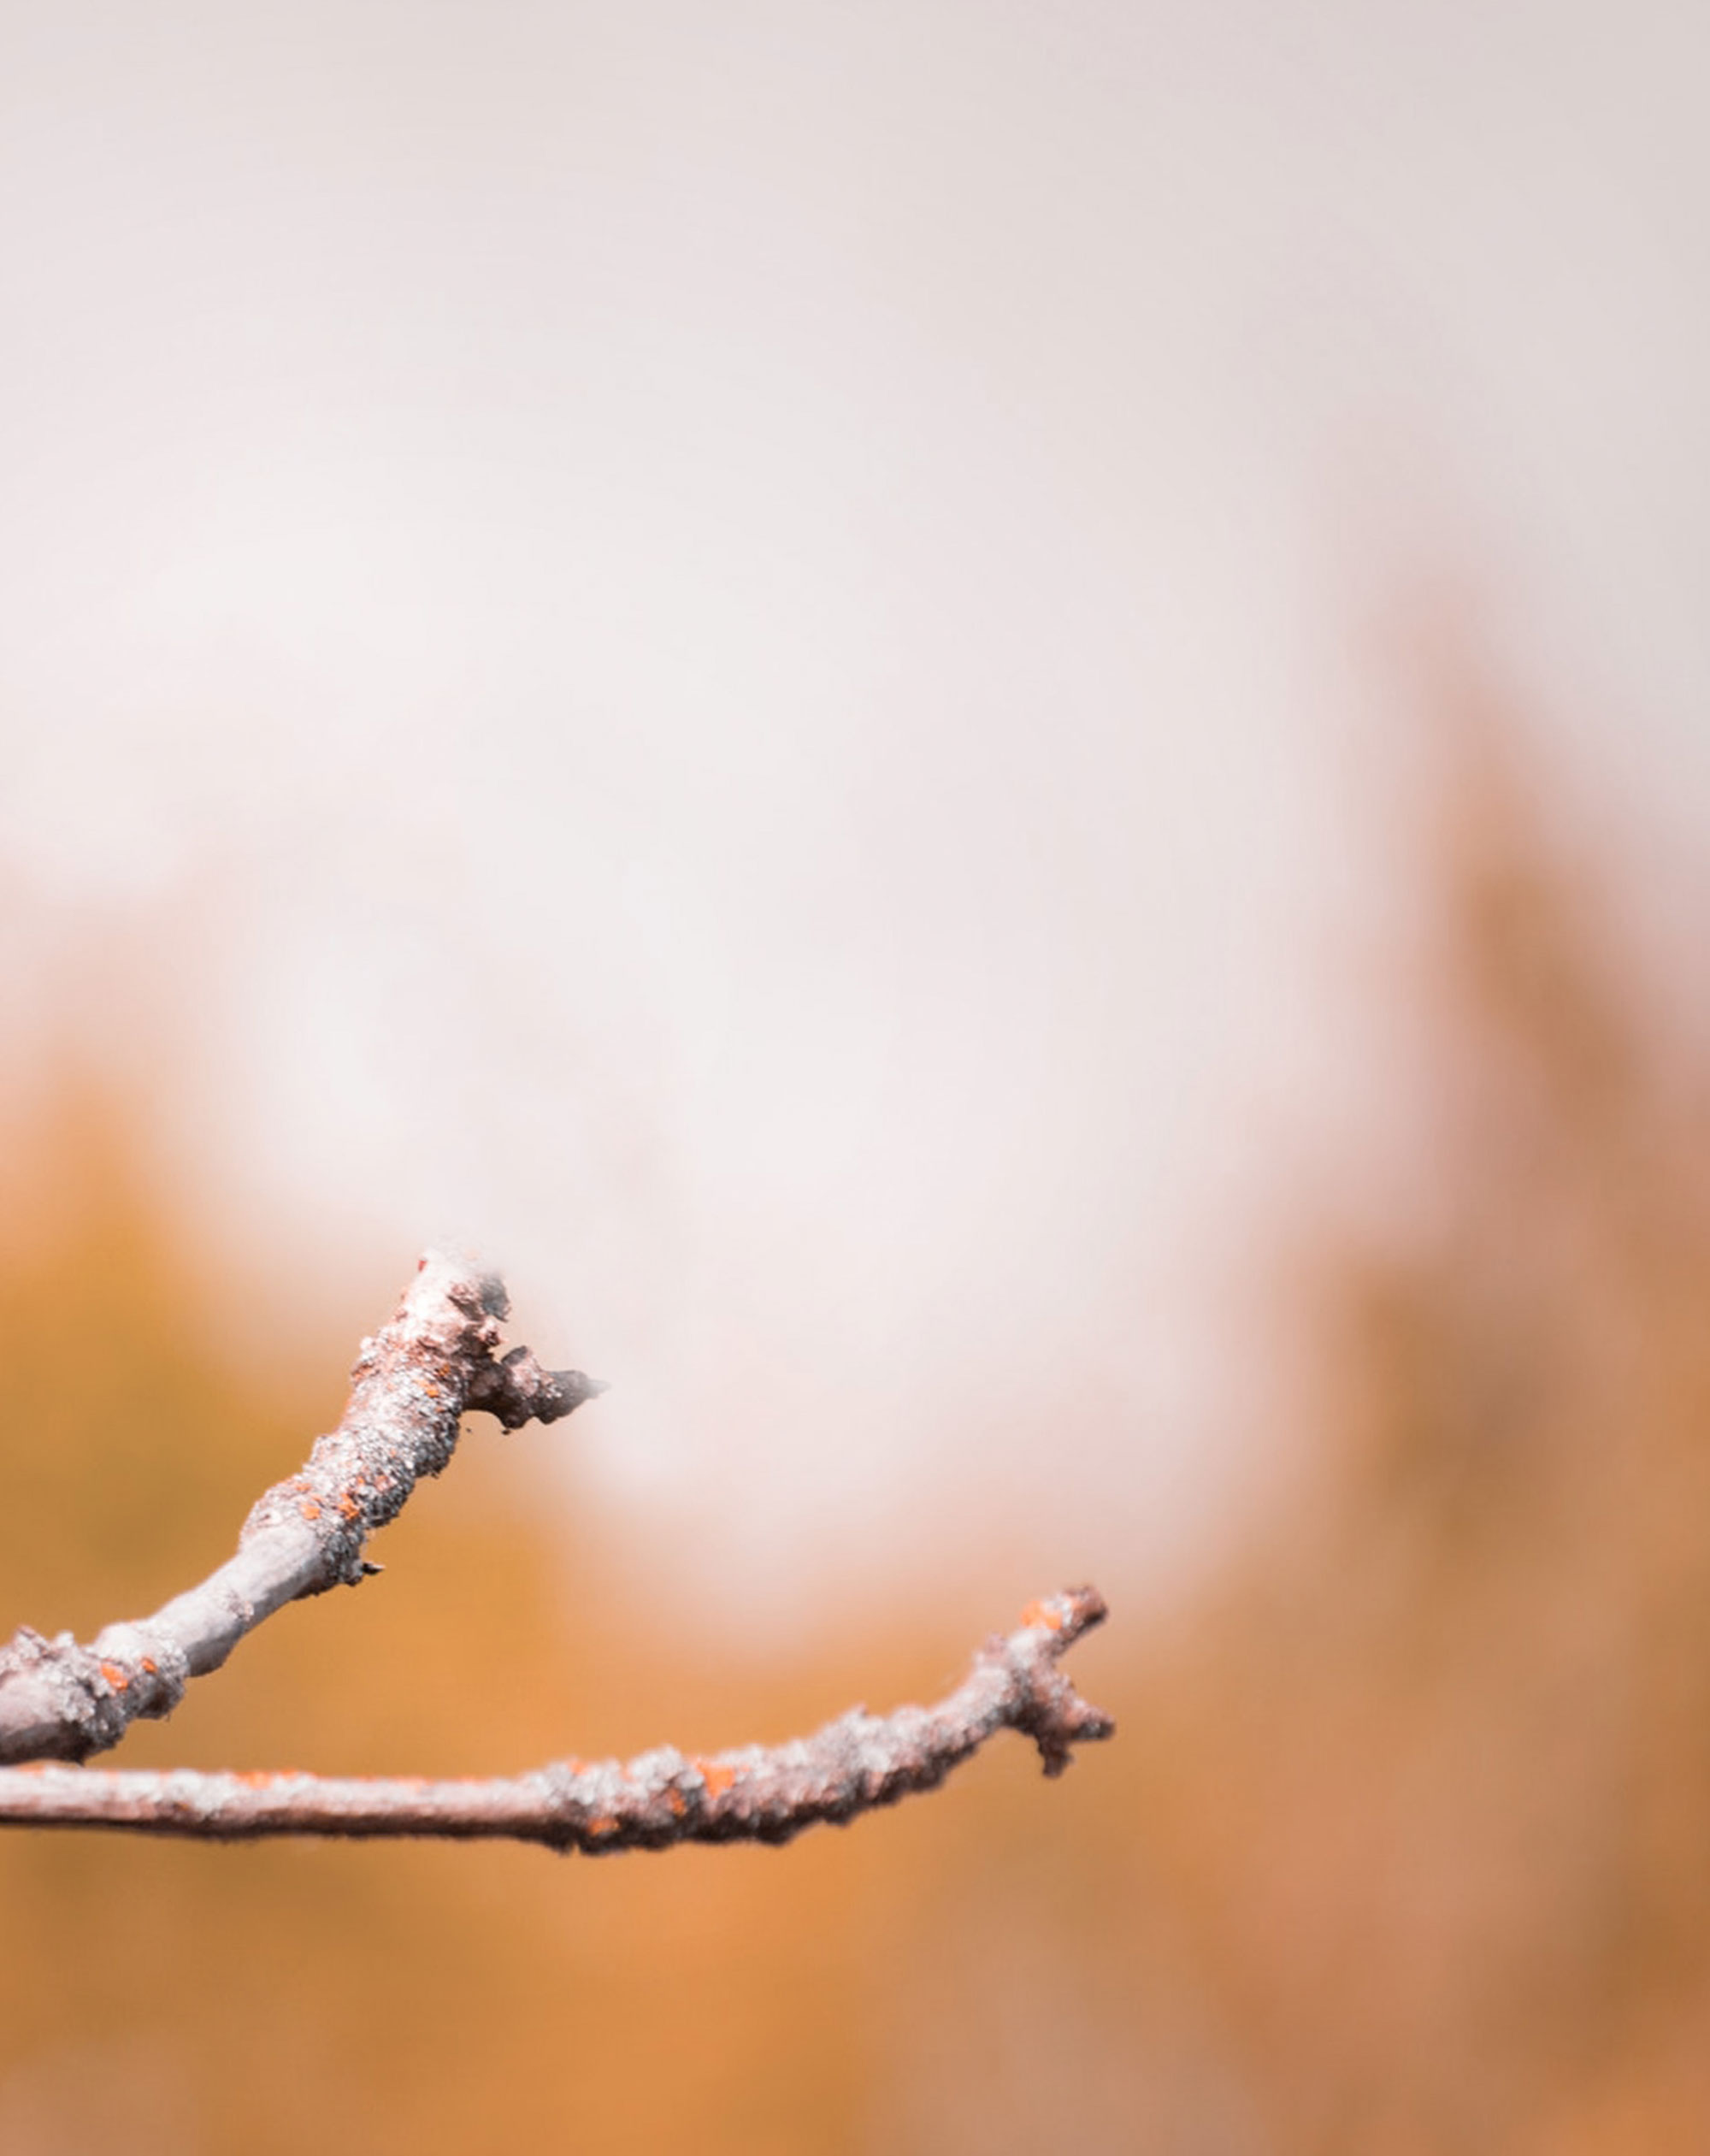 Branches Full HD Blur Background Free Stock Image